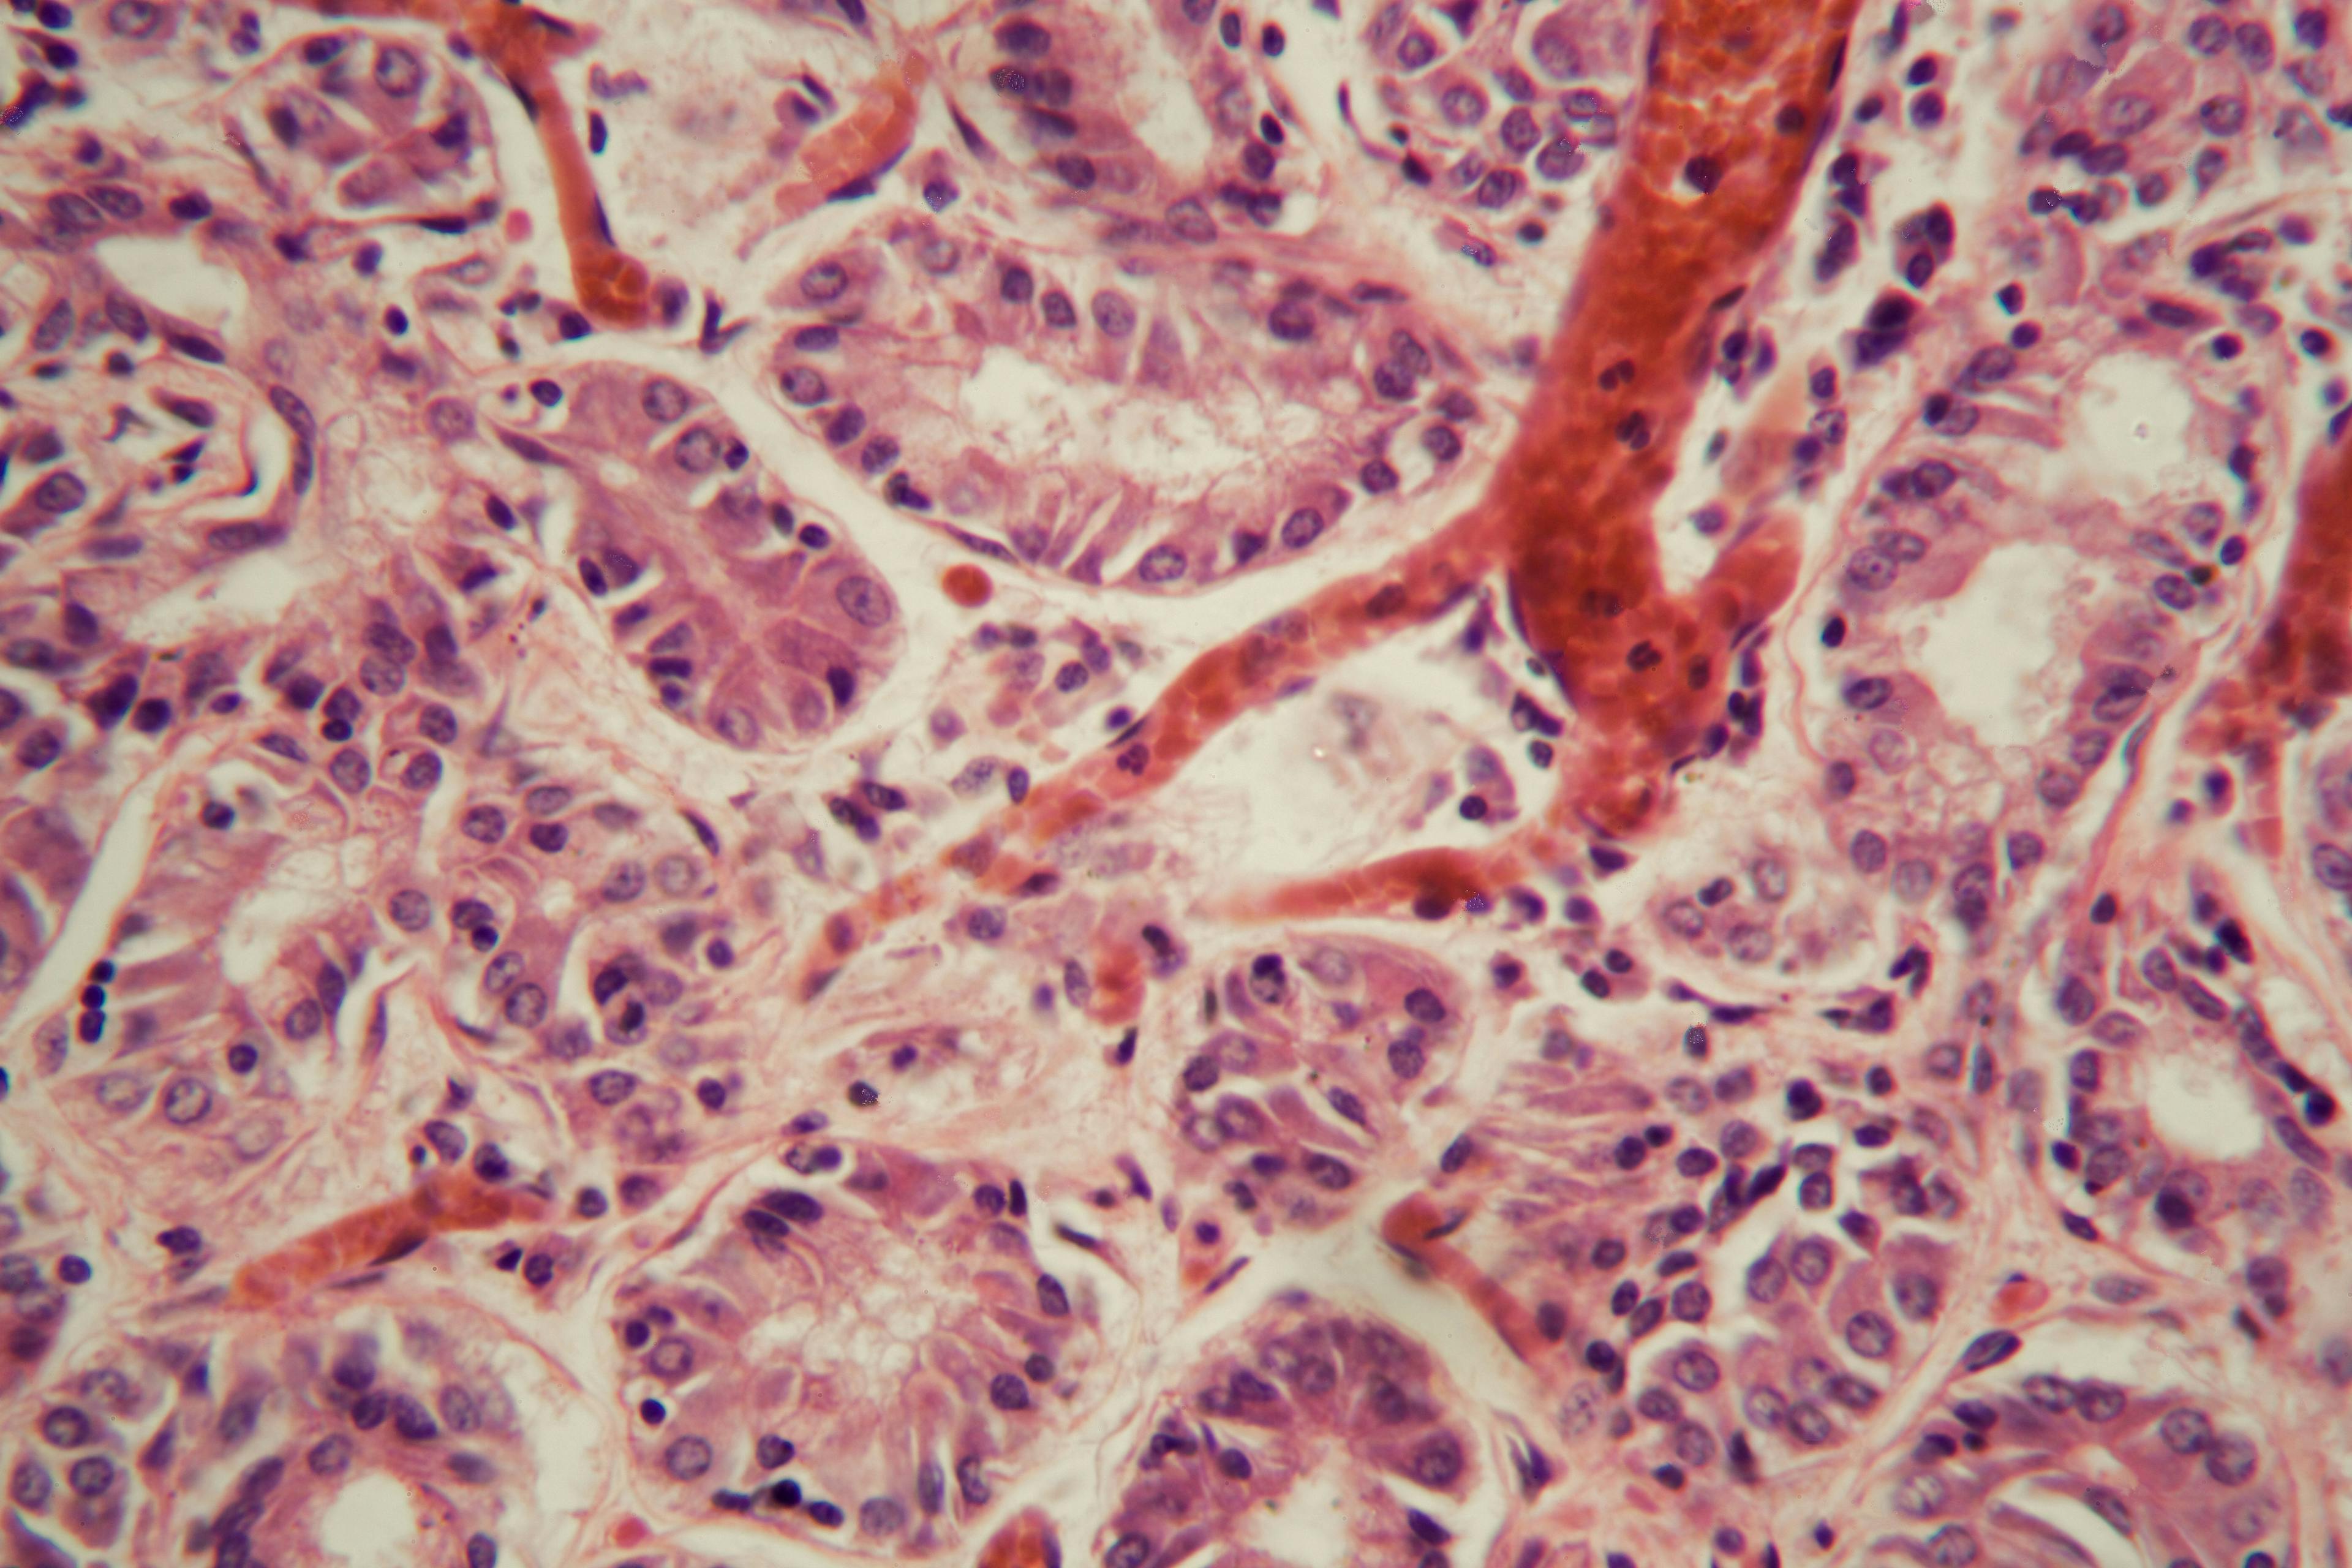 Human lung tissue with Pulmonary embolism under a microscope. 